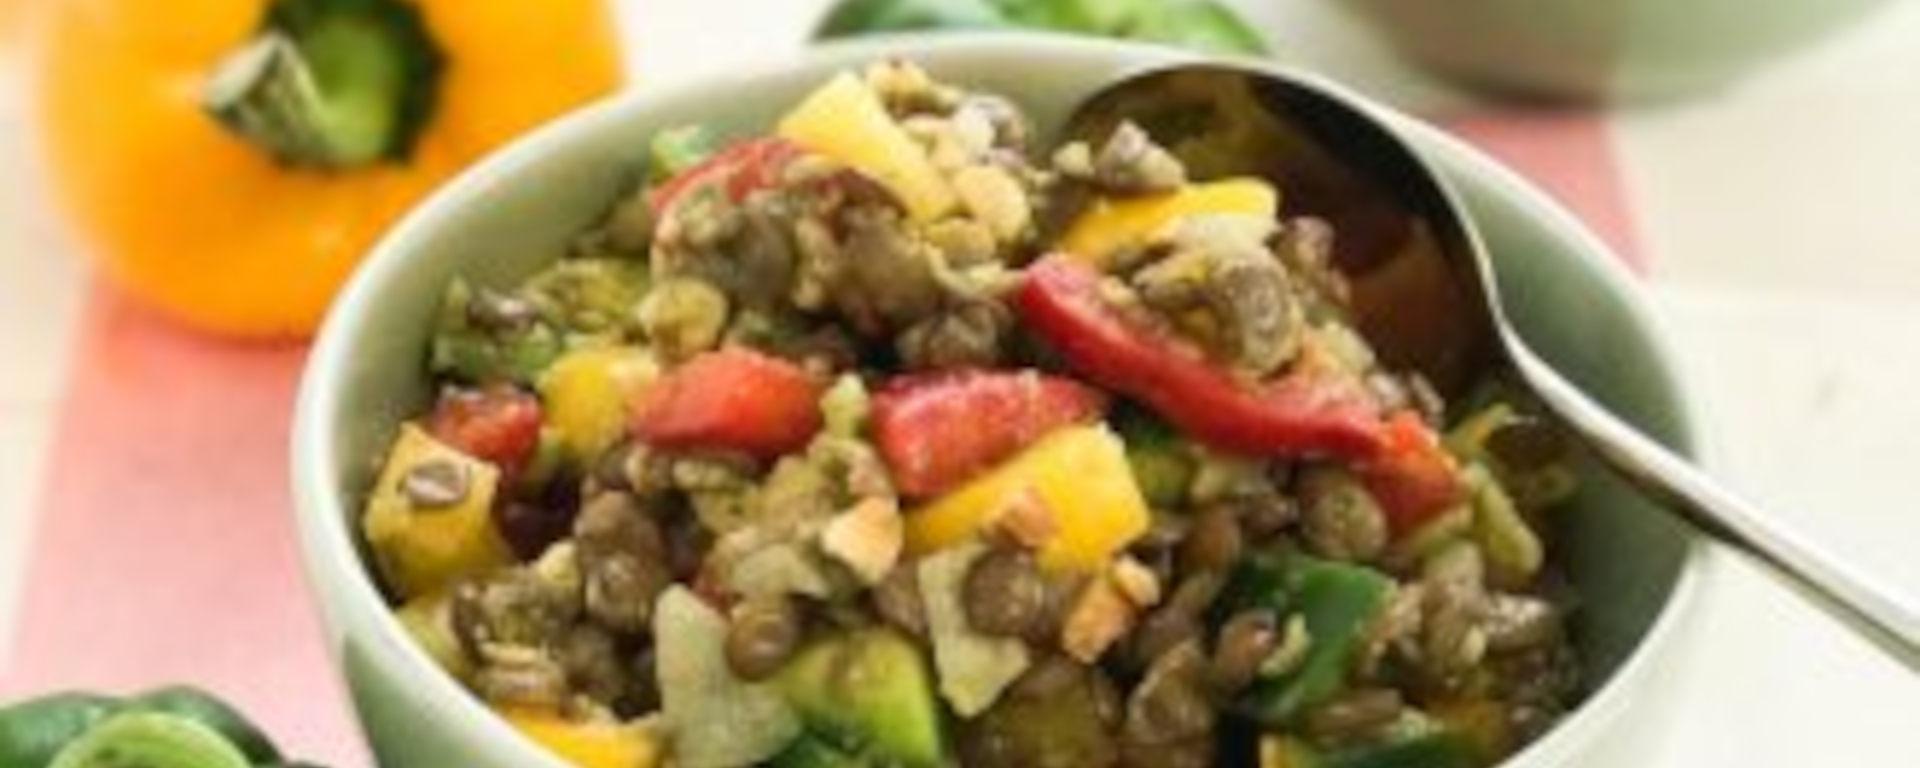 LuvMyRecipe.com - Brown Lentil Salad with Bell Pepper and Avocado Featured